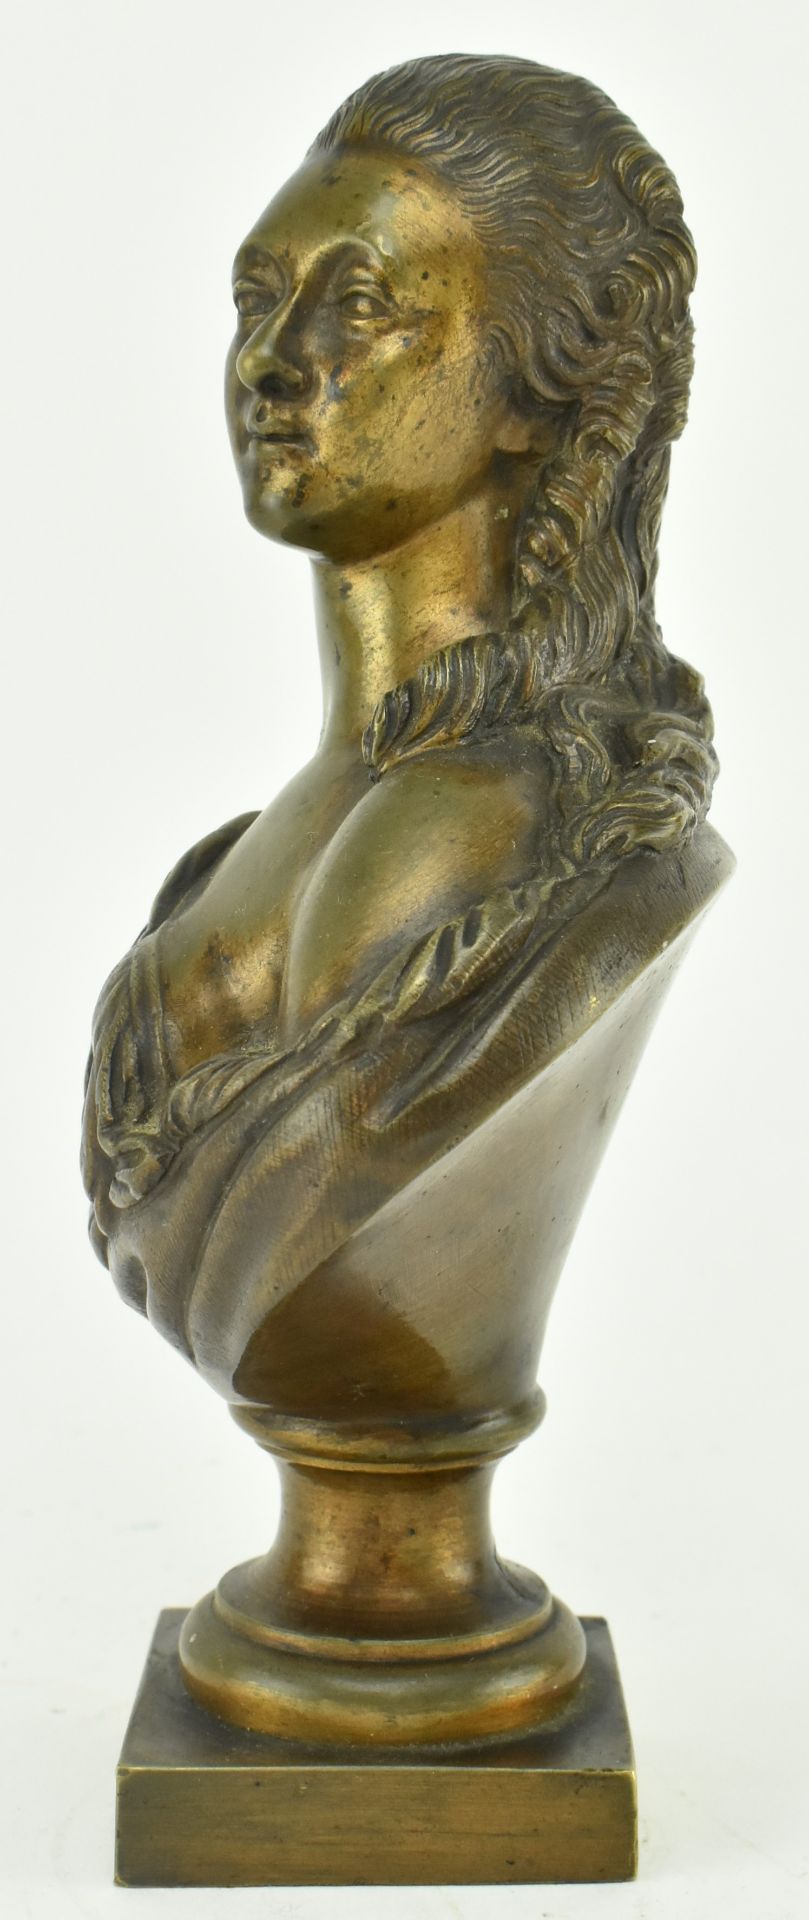 RICHAUD ET CIE - 19TH CENTURY FRENCH BRONZE BUST OF WOMAN - Image 2 of 5